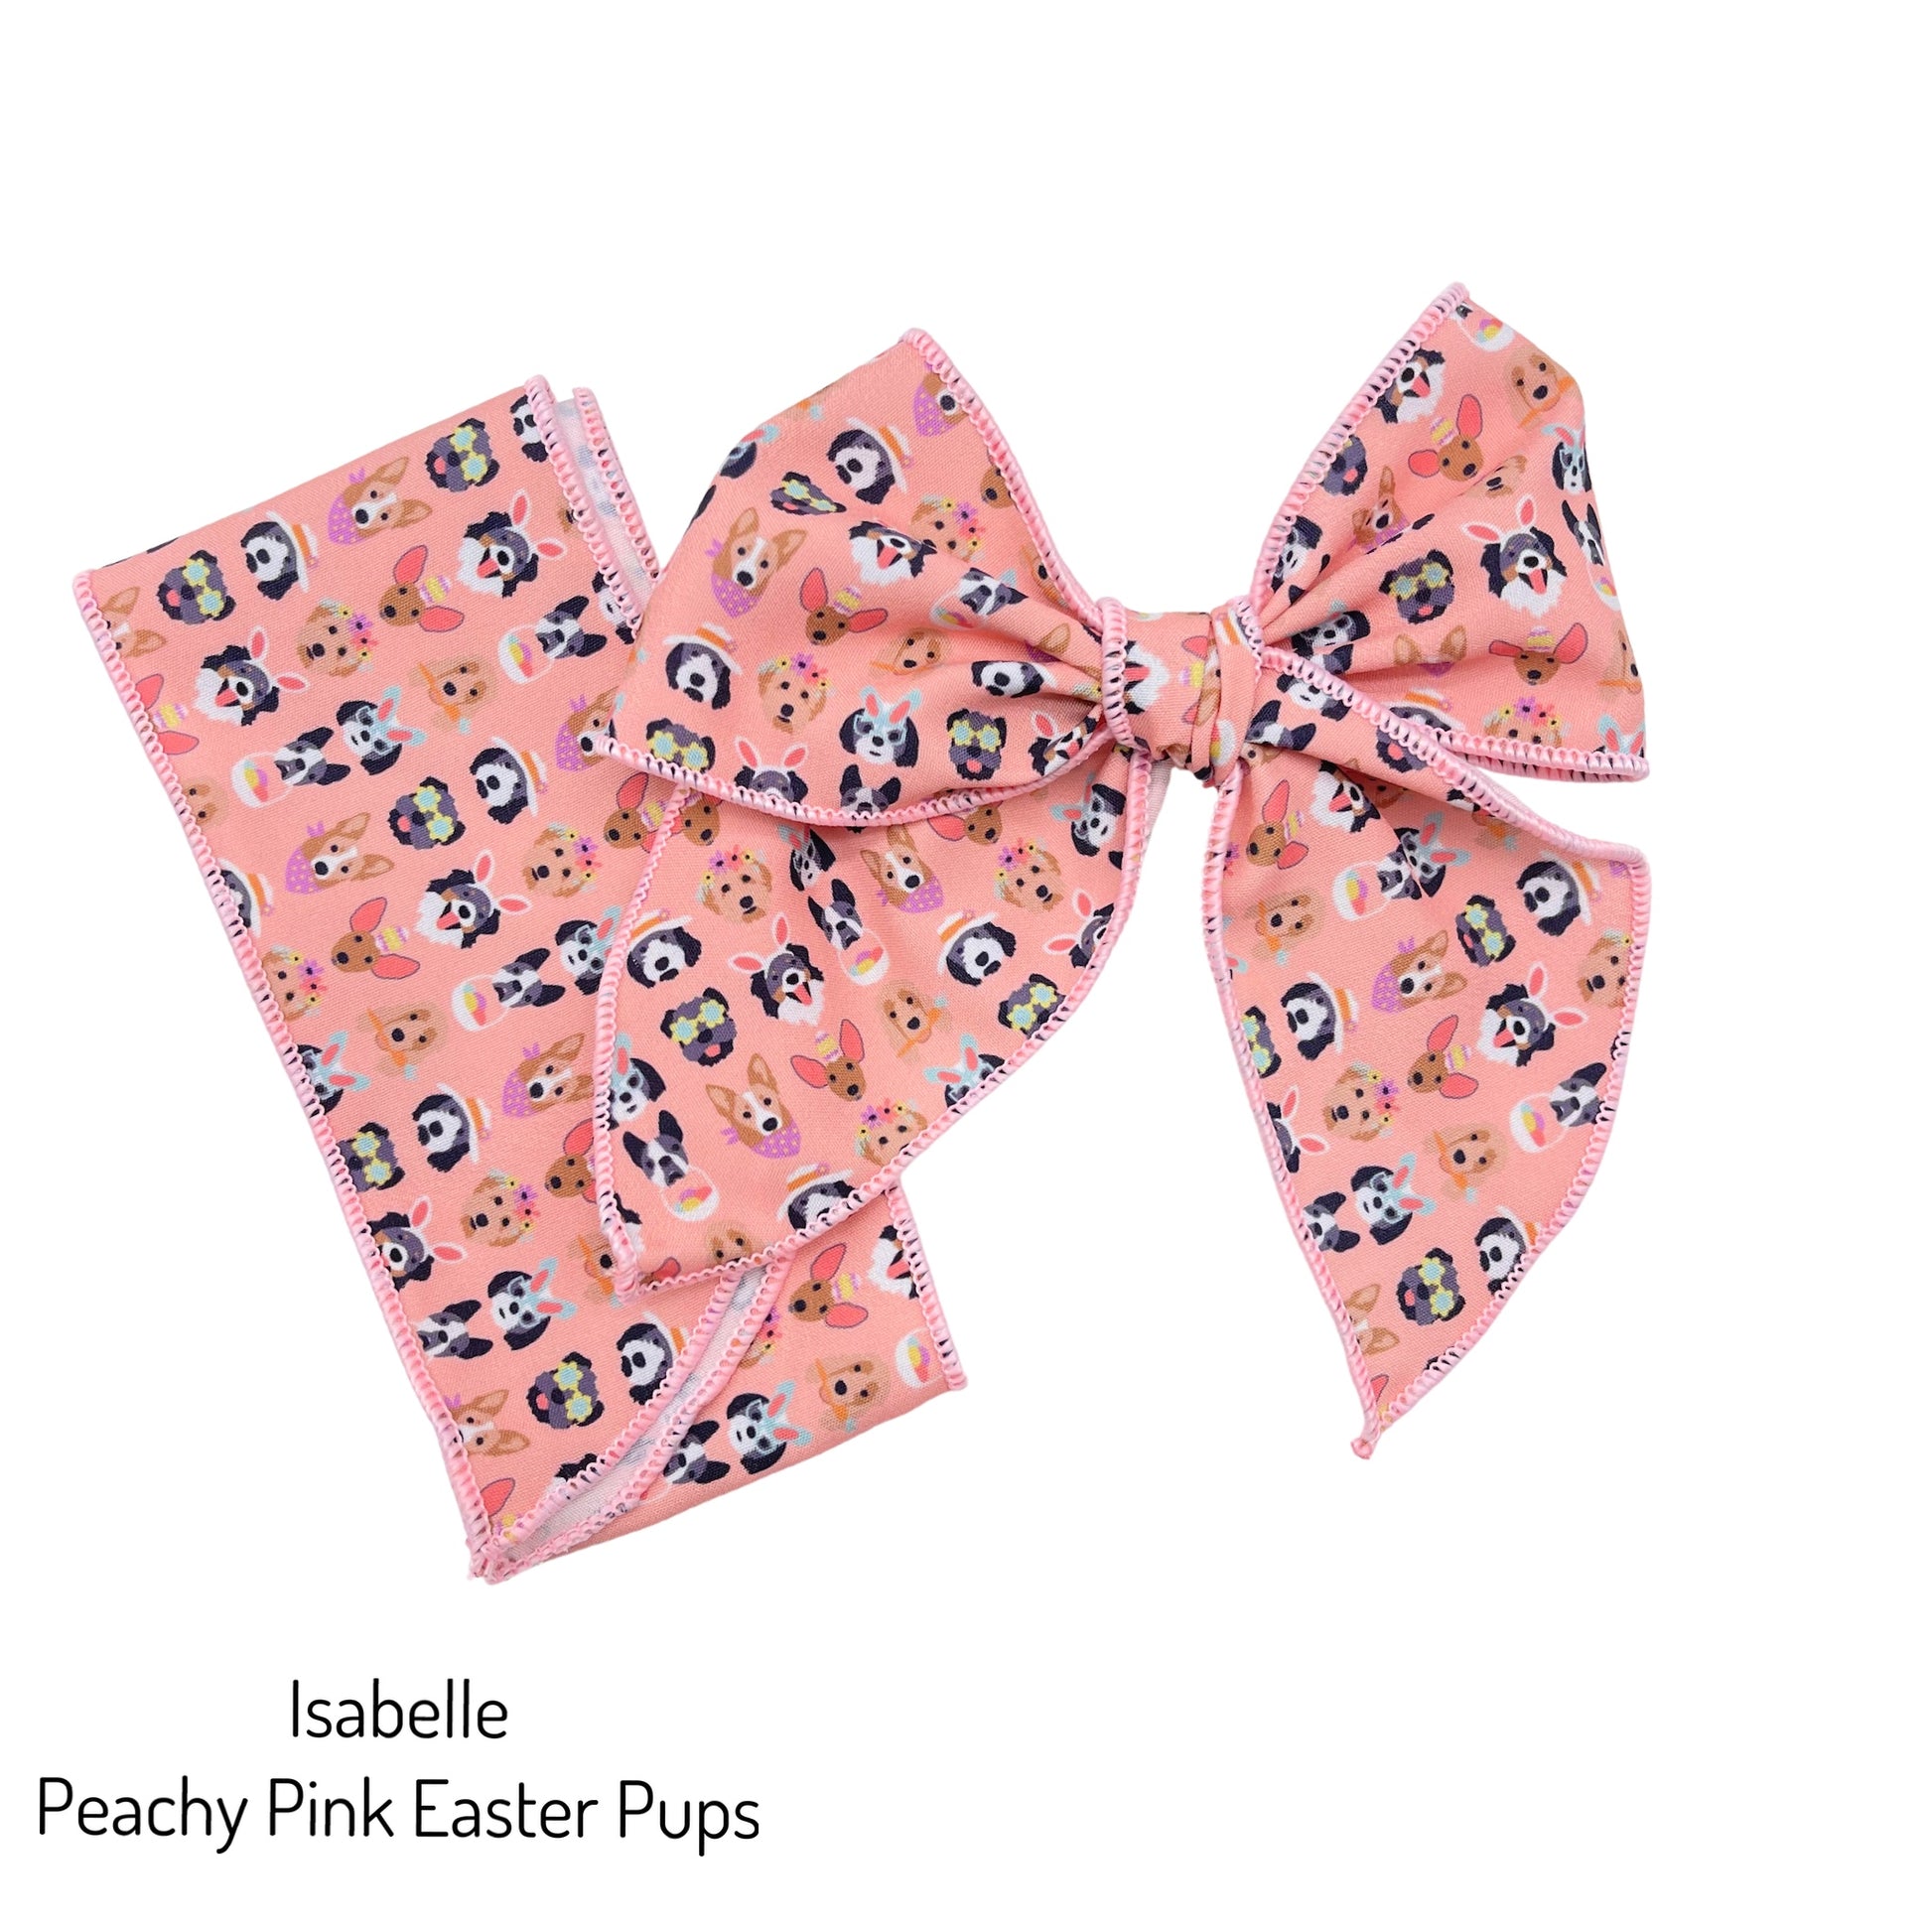 Tied and untied peach pink Isabelle style bow strip with Easter dogs pattern designed by Hey Cute Design.